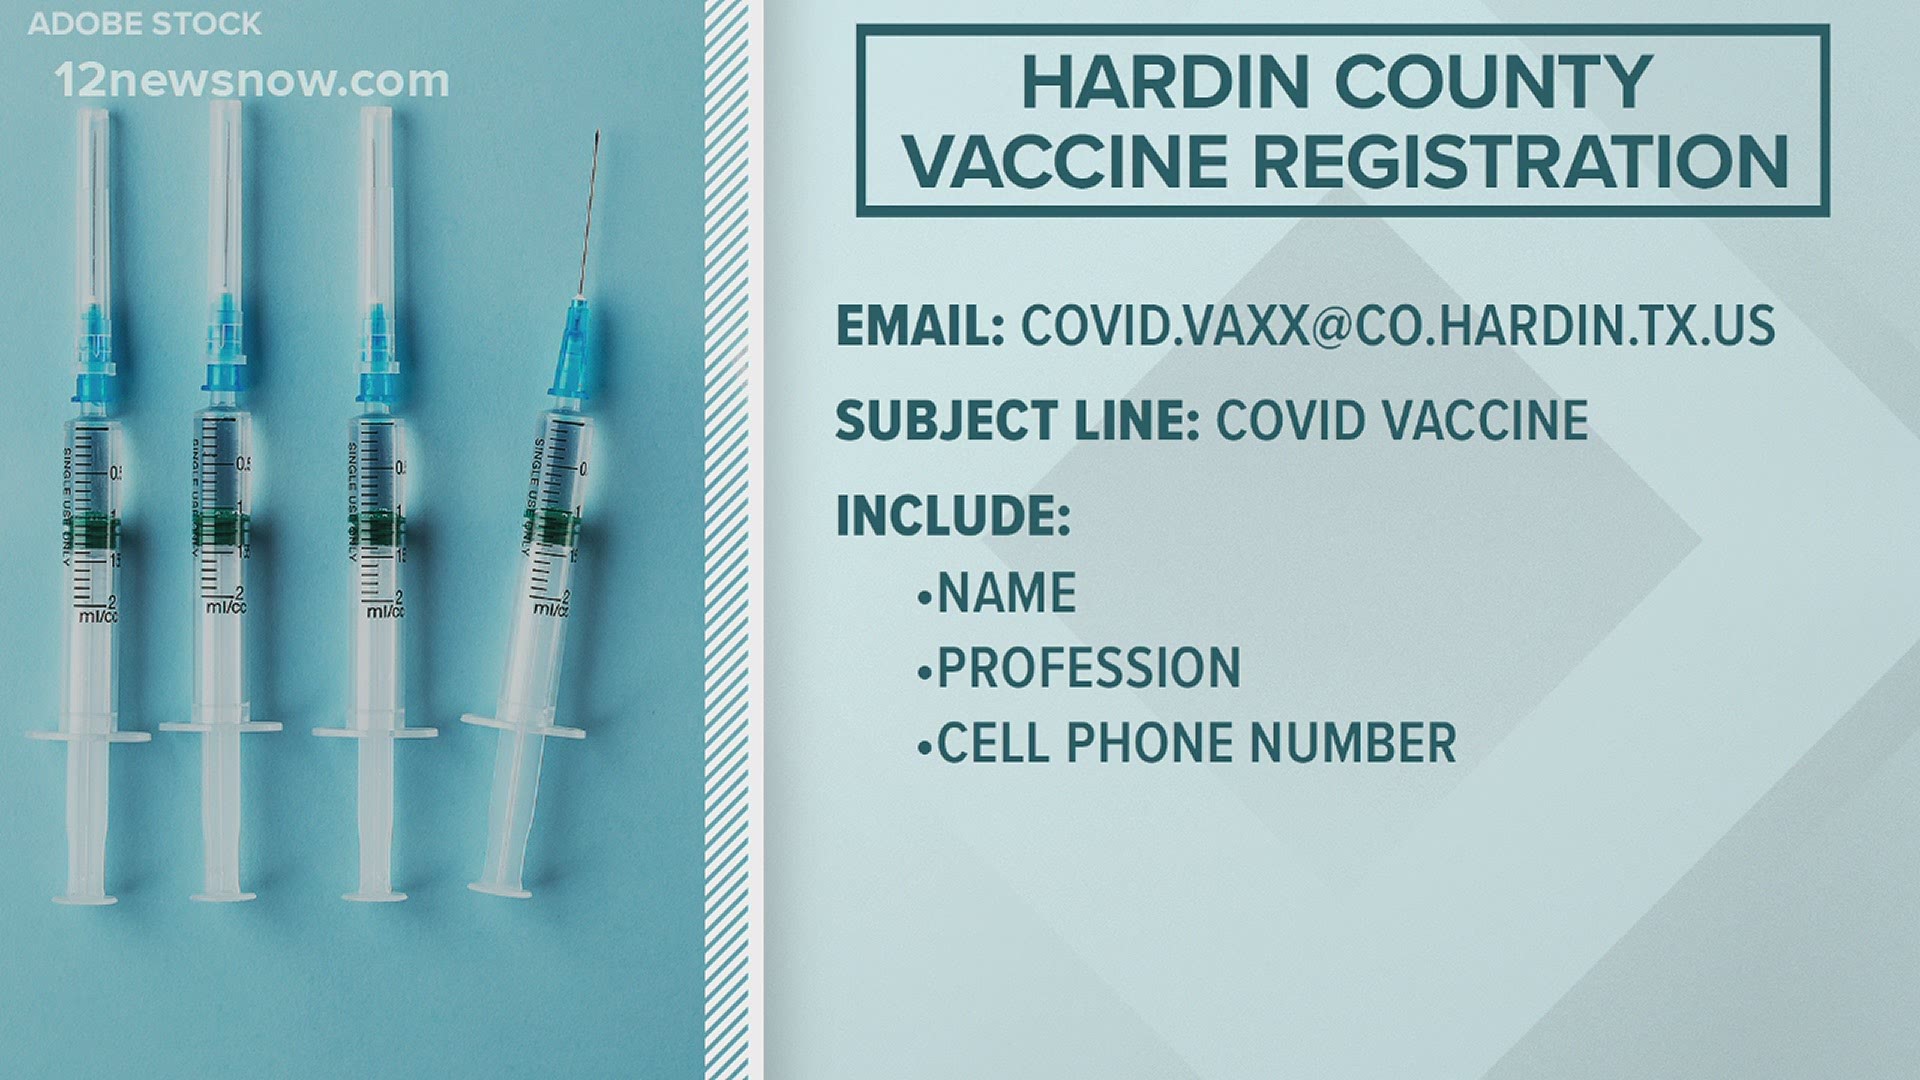 On Friday, Hardin County Judge Wayne McDaniel made a Facebook post asking his citizens to register for the vaccine even if you don't fall into the phase 1 list.